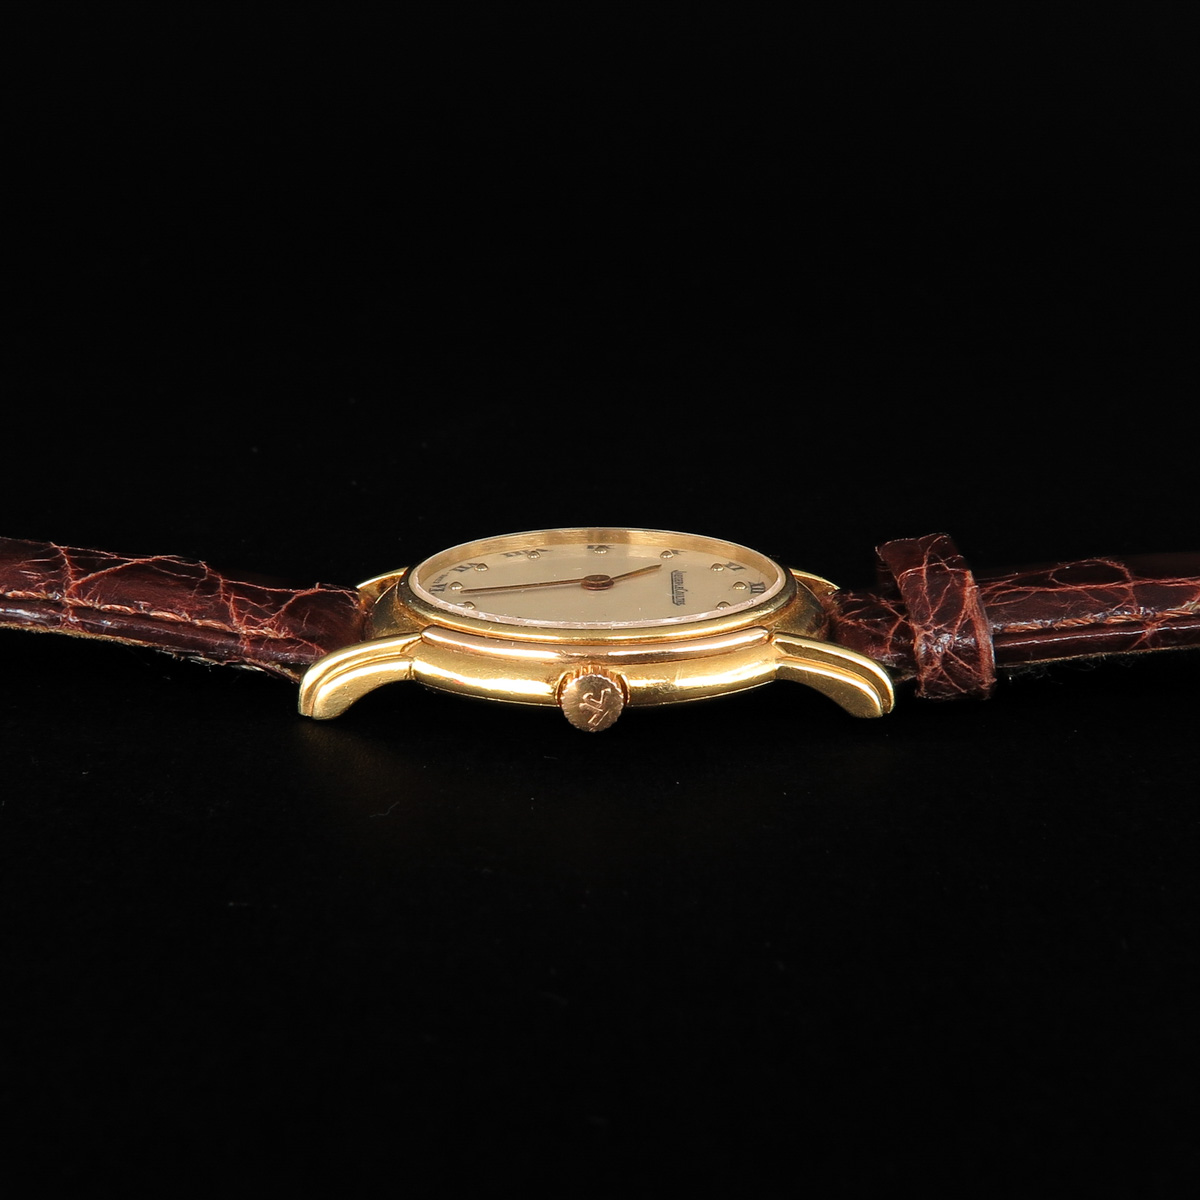 A Ladies Jaeger-LeCoultre Watch - Image 5 of 8